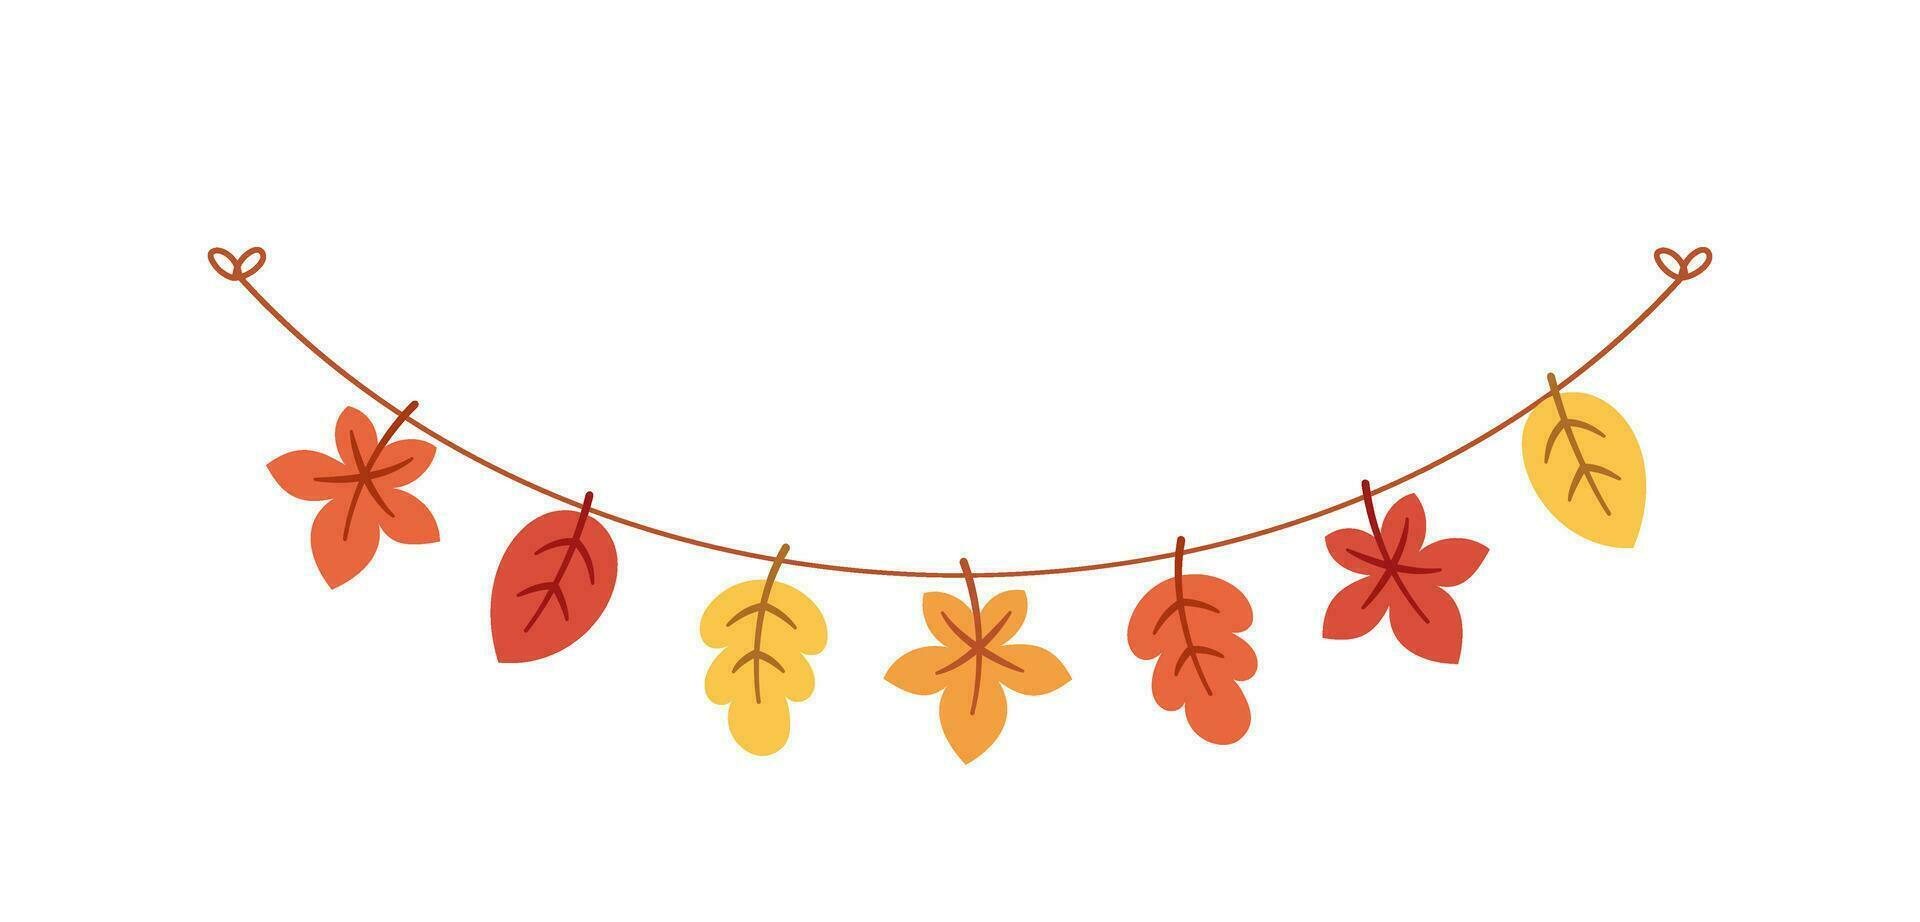 Autumn leaves garland in orange and red colors for Fall and Thanksgiving season. Vector isolated on white background.